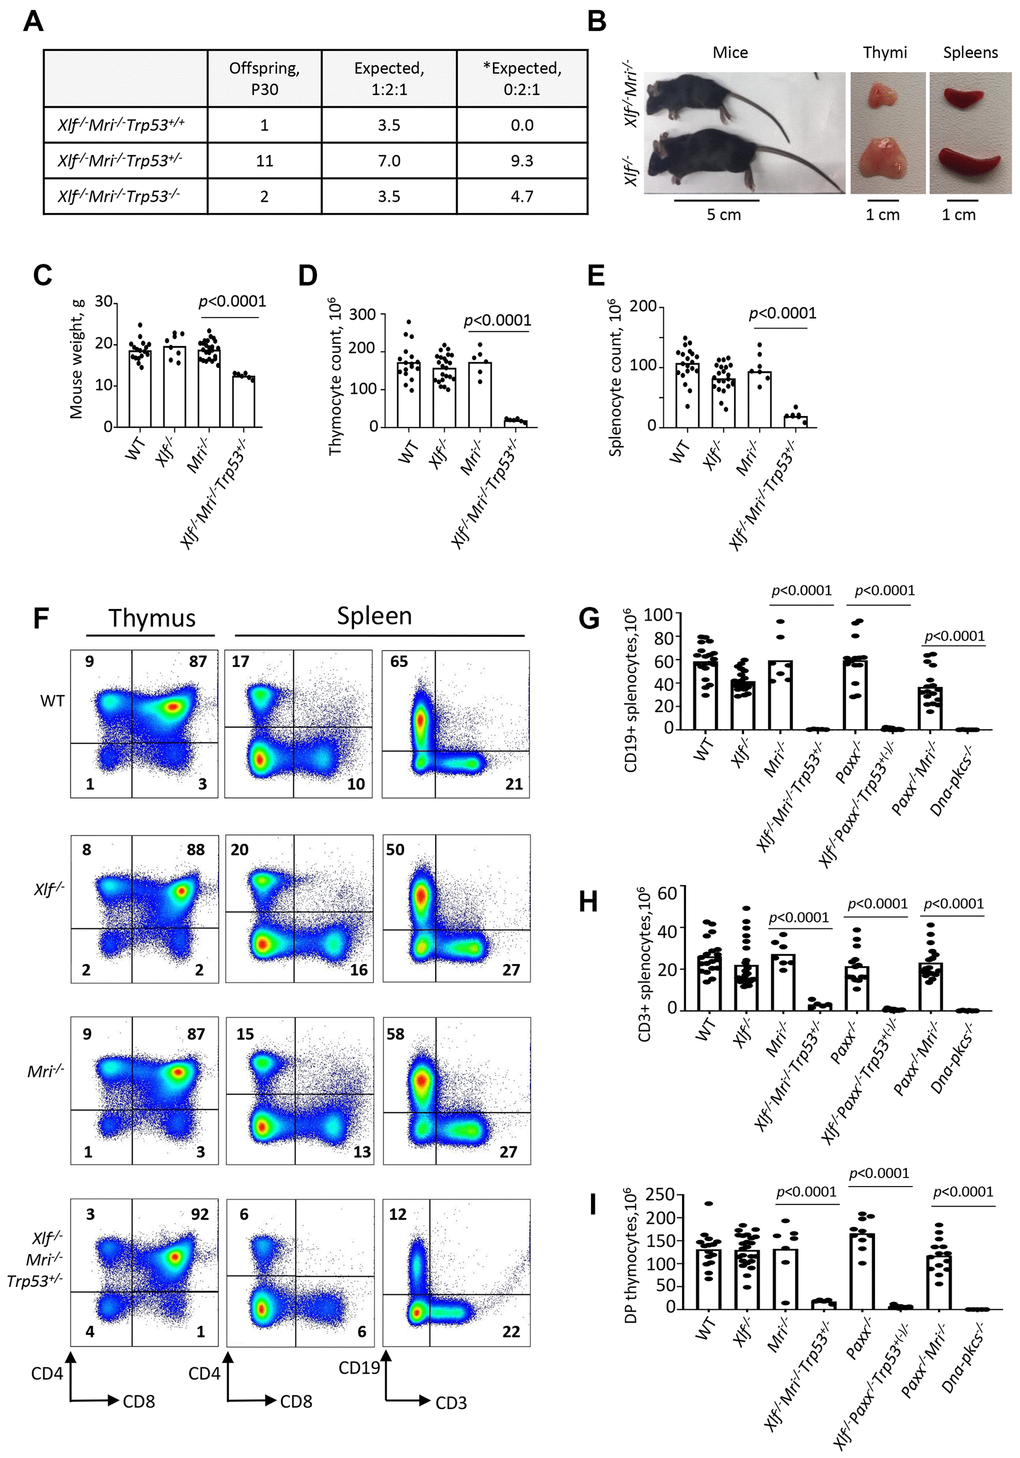 Development of B and T lymphocytes in Xlf-/-Mri-/-Trp53+/- mice. (A) Number of thirty-day-old mice (P30) of indicated genotypes. *Expected distribution assuming lethality. (B) Comparison of body size, thymi and spleens of XLF/MRI-deficient and XLF-deficient mice of the same age. (C) Weights of WT, Xlf-/-, Mri-/-, Xlf-/-Mri-/-Trp53+/- mice. (D, E) Number (×106) of thymocytes (D) and splenocytes (E) in WT, Xlf-/-, Mri-/-, Xlf-/-Mri-/-Trp53+/- mice. (F) Flow cytometric analysis of thymic and splenic T cell subsets and splenic B cells. (G, H, I) Number (×106) of splenic CD19+ B cells (G), splenic CD3+ T cells (H) and thymic CD4+CD8+ double positive (DP) T cells (I) in WT, Xlf-/-, Mri-/-, Xlf-/-Mri-/-Trp53+/-, Paxx-/-, Xlf-/-Paxx-/-Trp53+(-)/- and Paxx-/-Mri-/- mice. Dna-pkcs-/- mice were used as an immunodeficient control. Comparisons between every two groups were made using one-way ANOVA, GraphPad Prism 8.0.1. Xlf-/-Paxx-/-Trp53+(-)/- is a combination of Xlf-/-Paxx-/-Trp53+/- and Xlf-/-Paxx-/-Trp53-/-. Not shown in the graph for (G): WT vs Paxx-/-Mri-/-, pPaxx-/- vs Paxx-/-Mri-/-, pMri-/- vs Paxx-/-Mri-/-, pXlf-/- vs Paxx-/-Mri-/-, p=0.9270 (n.s), Xlf-/-Mri-/-Trp53+/- vs Paxx-/-Mri-/-, pXlf-/-Paxx-/-Trp53+(-)/- vs Paxx-/-Mri-/-, p